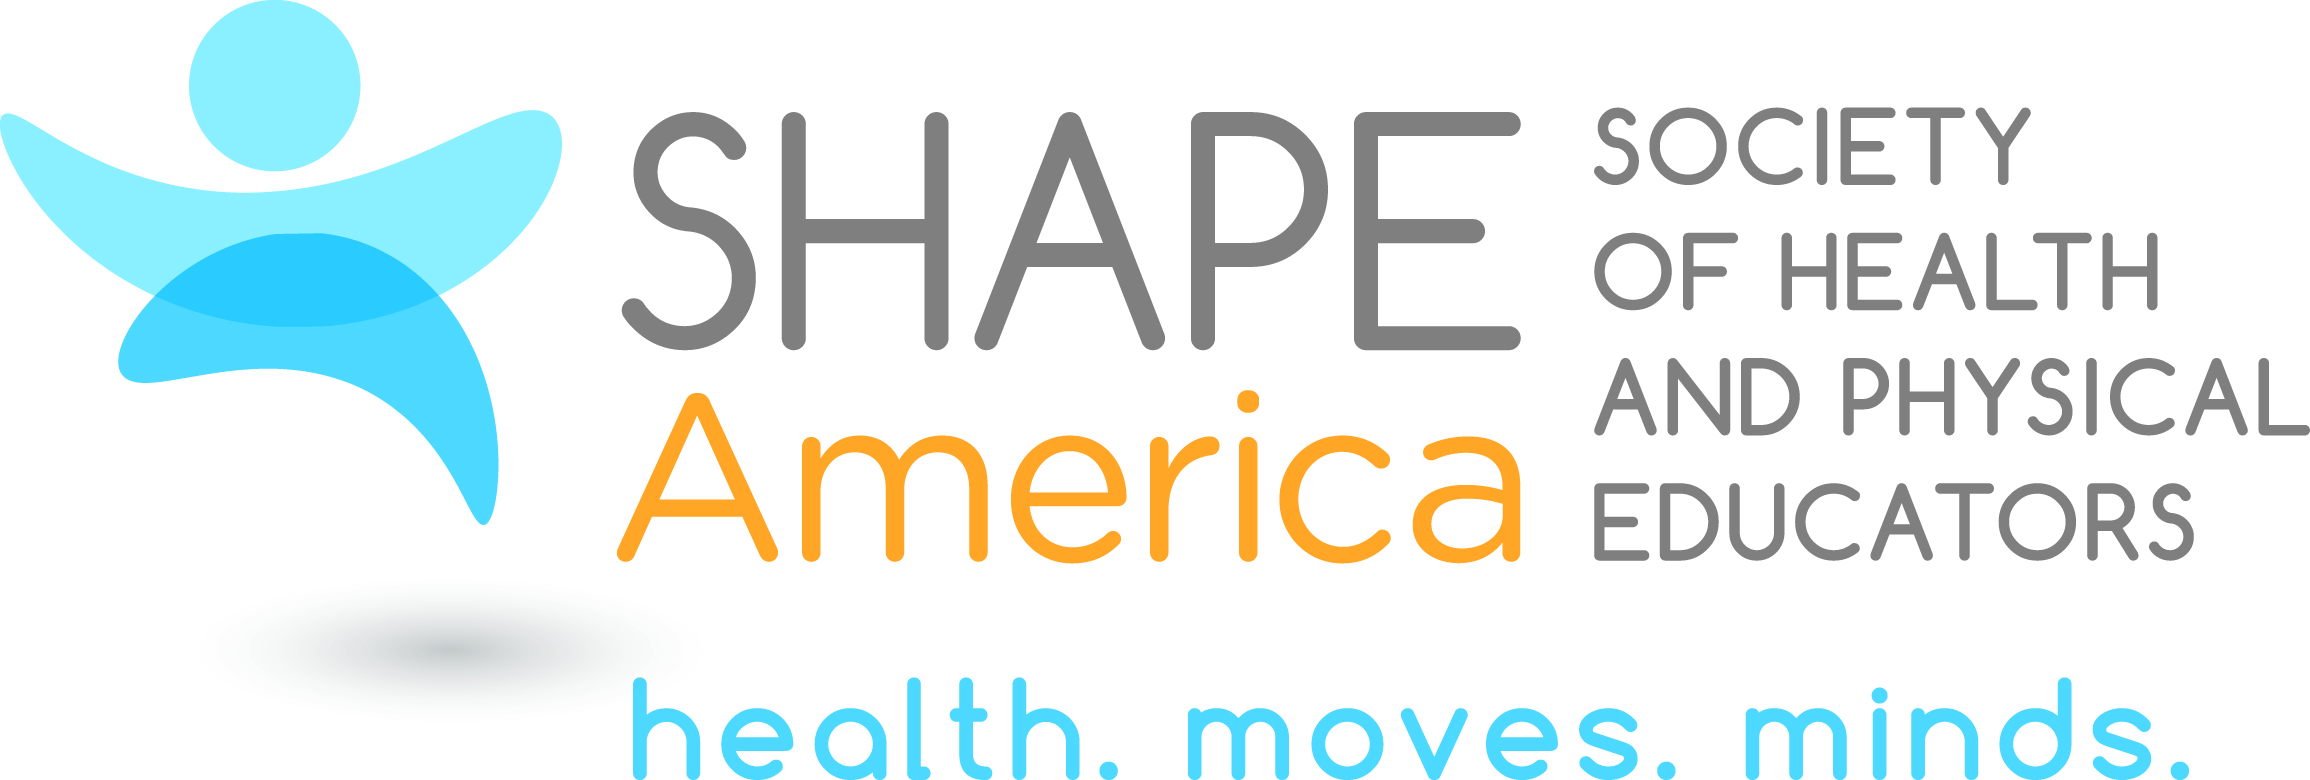 http://committoinclusion.org/wp-content/uploads/2014/10/SHAPE-Logo.jpg